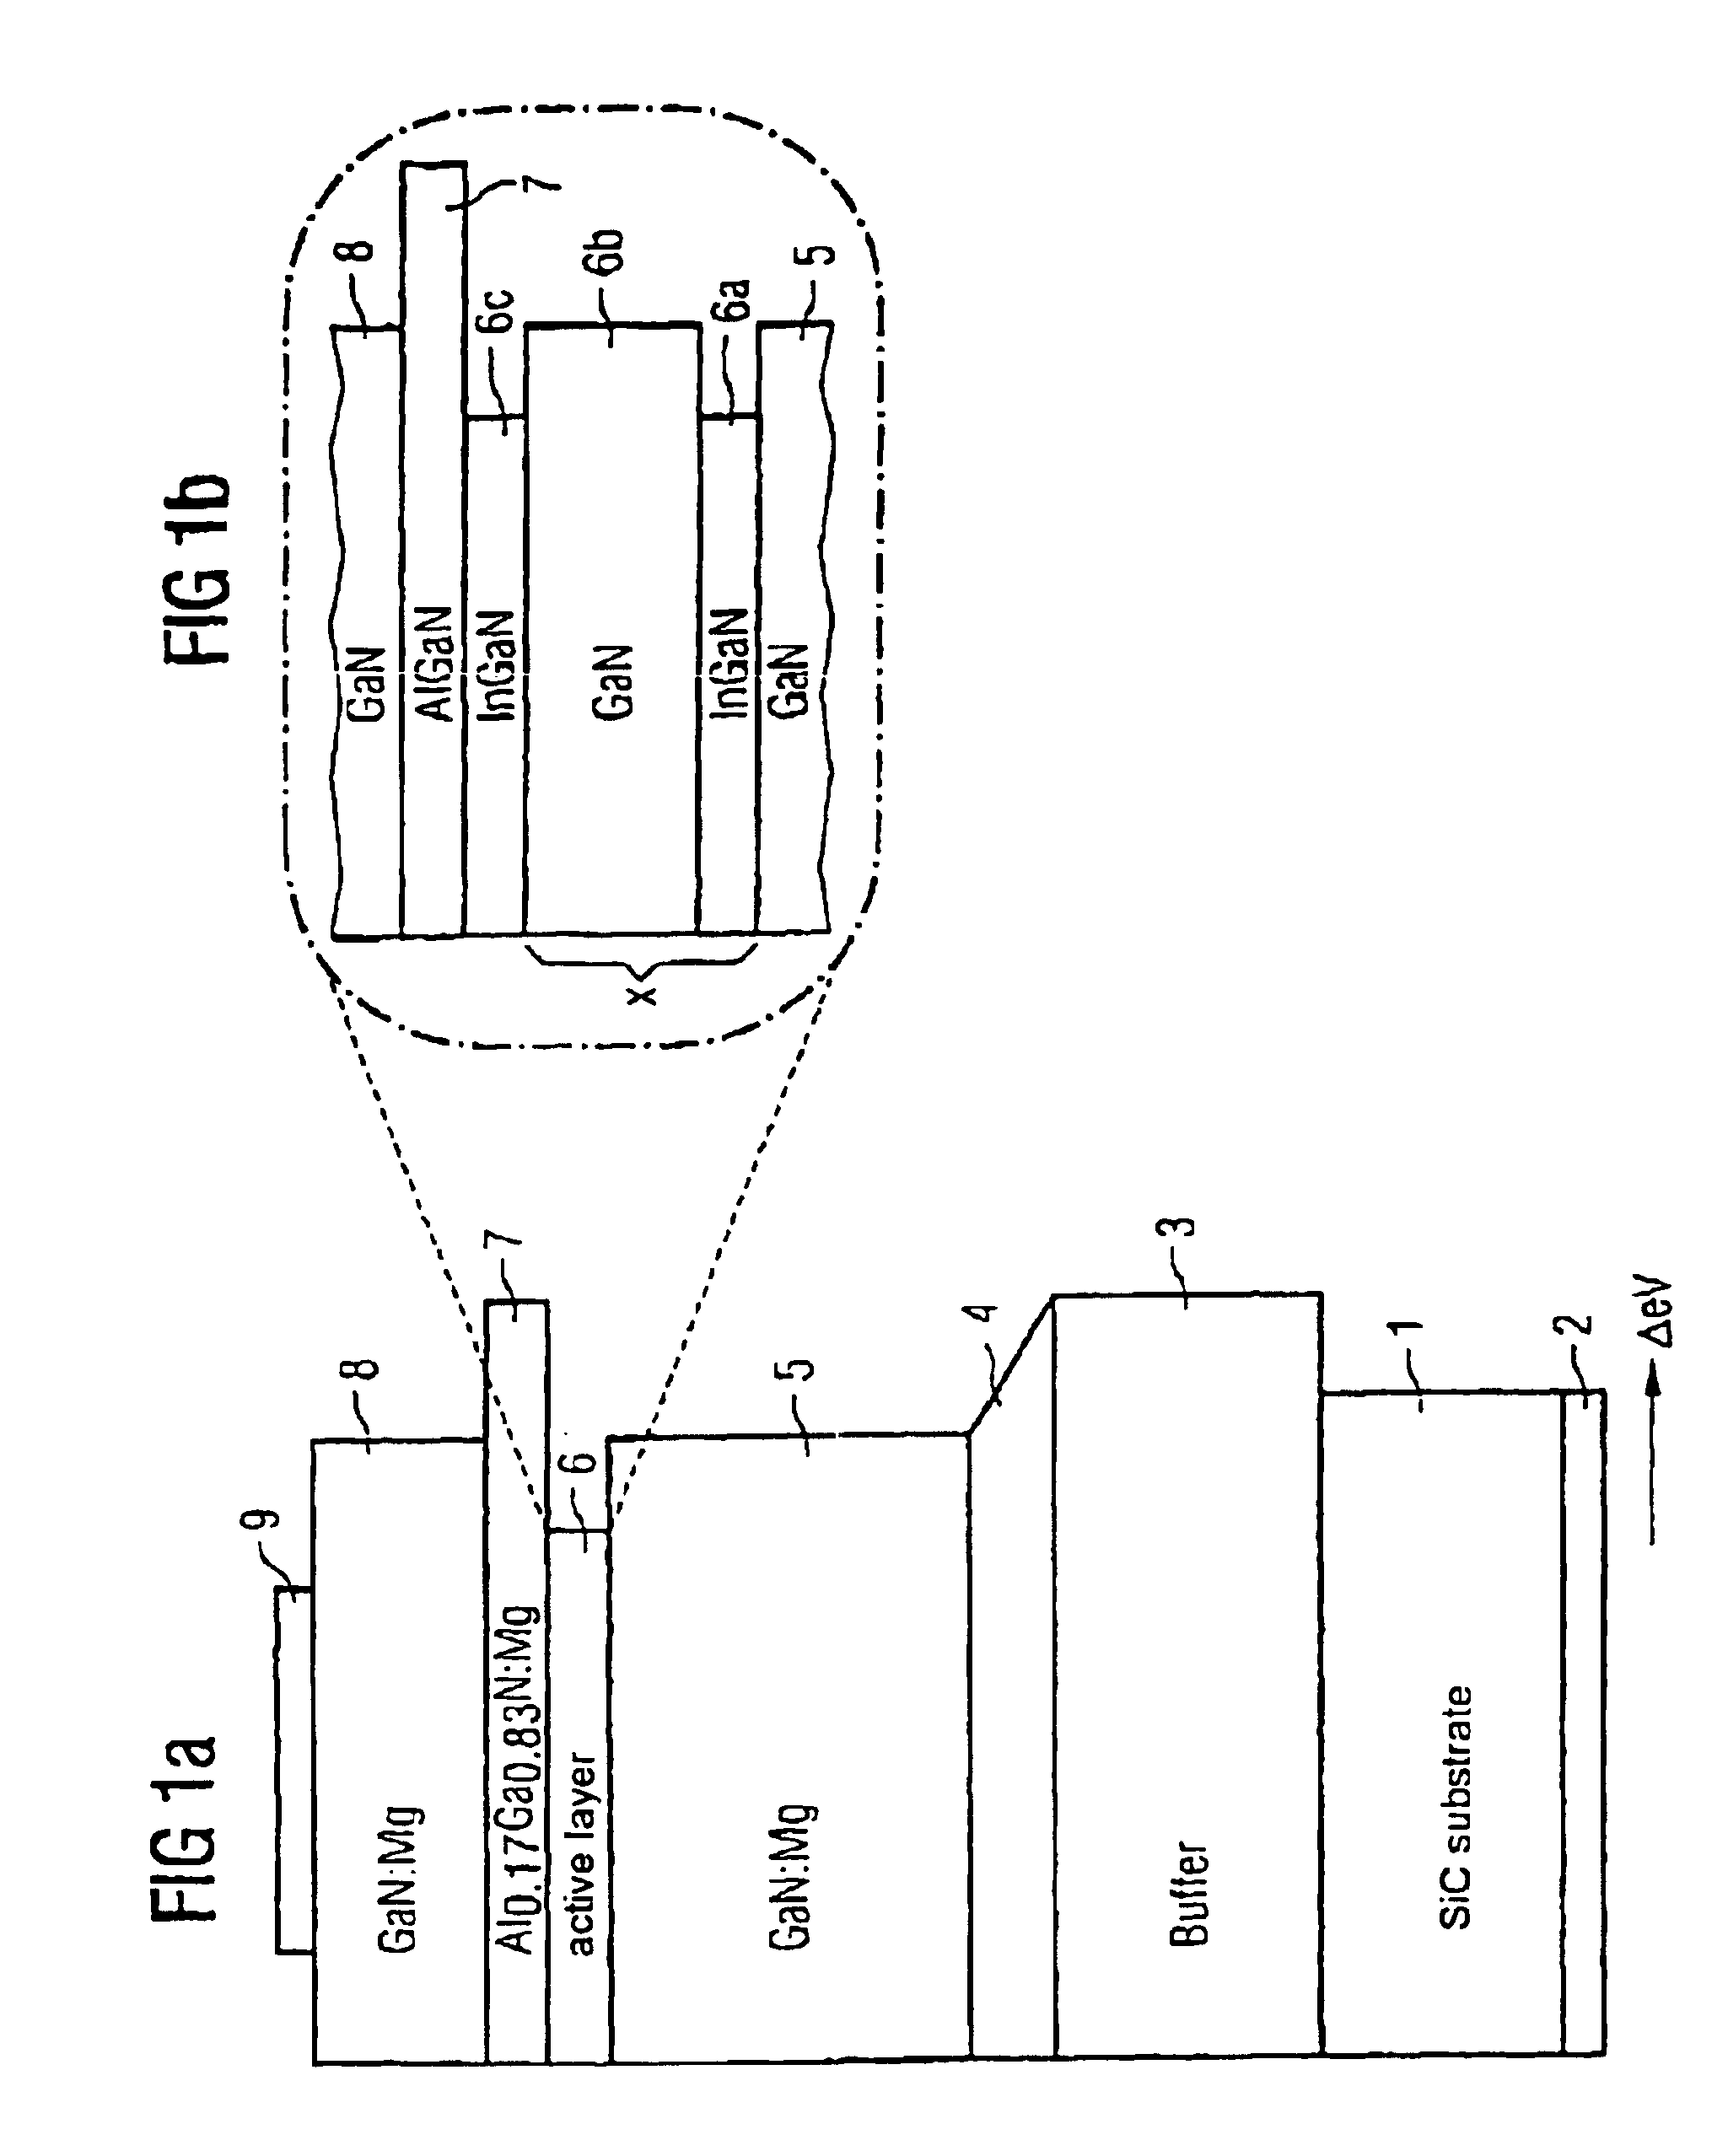 Optical semiconductor device comprising a multiple quantum well structure